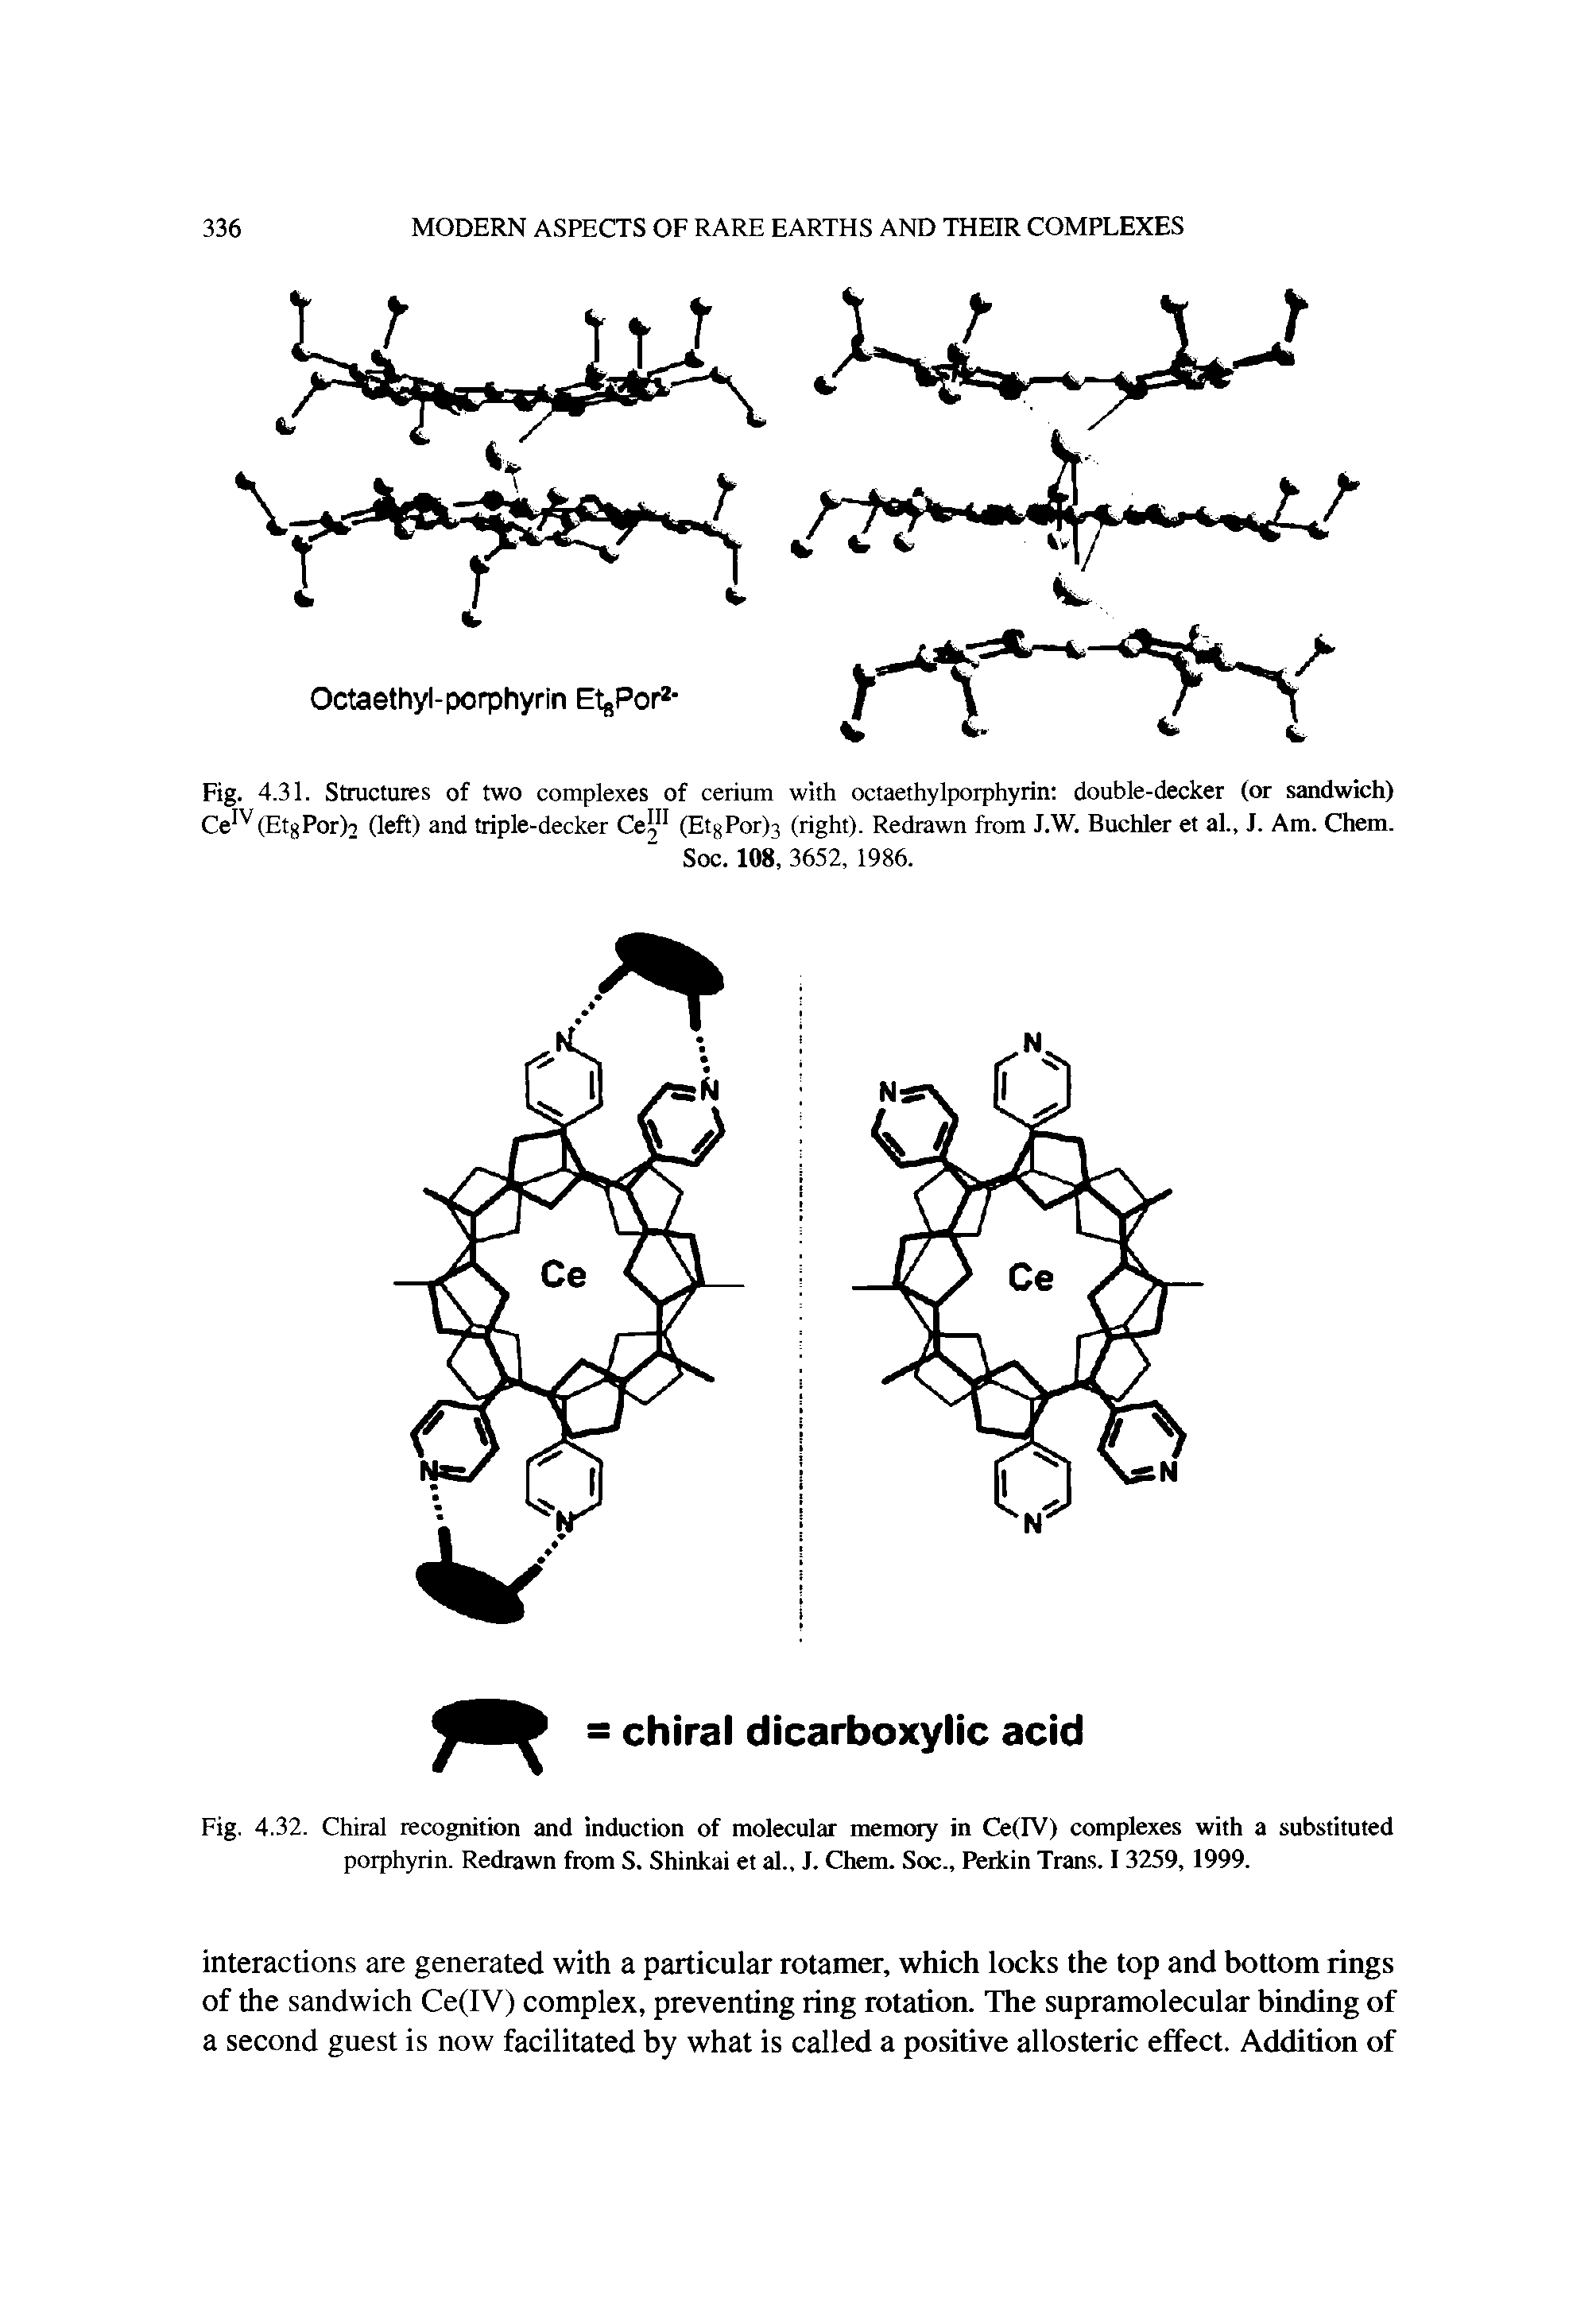 Fig. 4.32. Chiral recognition and induction of molecular memory in Ce(IV) complexes with a substituted porphyrin. Redrawn from S. Shinkai et al., J. Chem. Soc., Perkin Trans. I 3259, 1999.